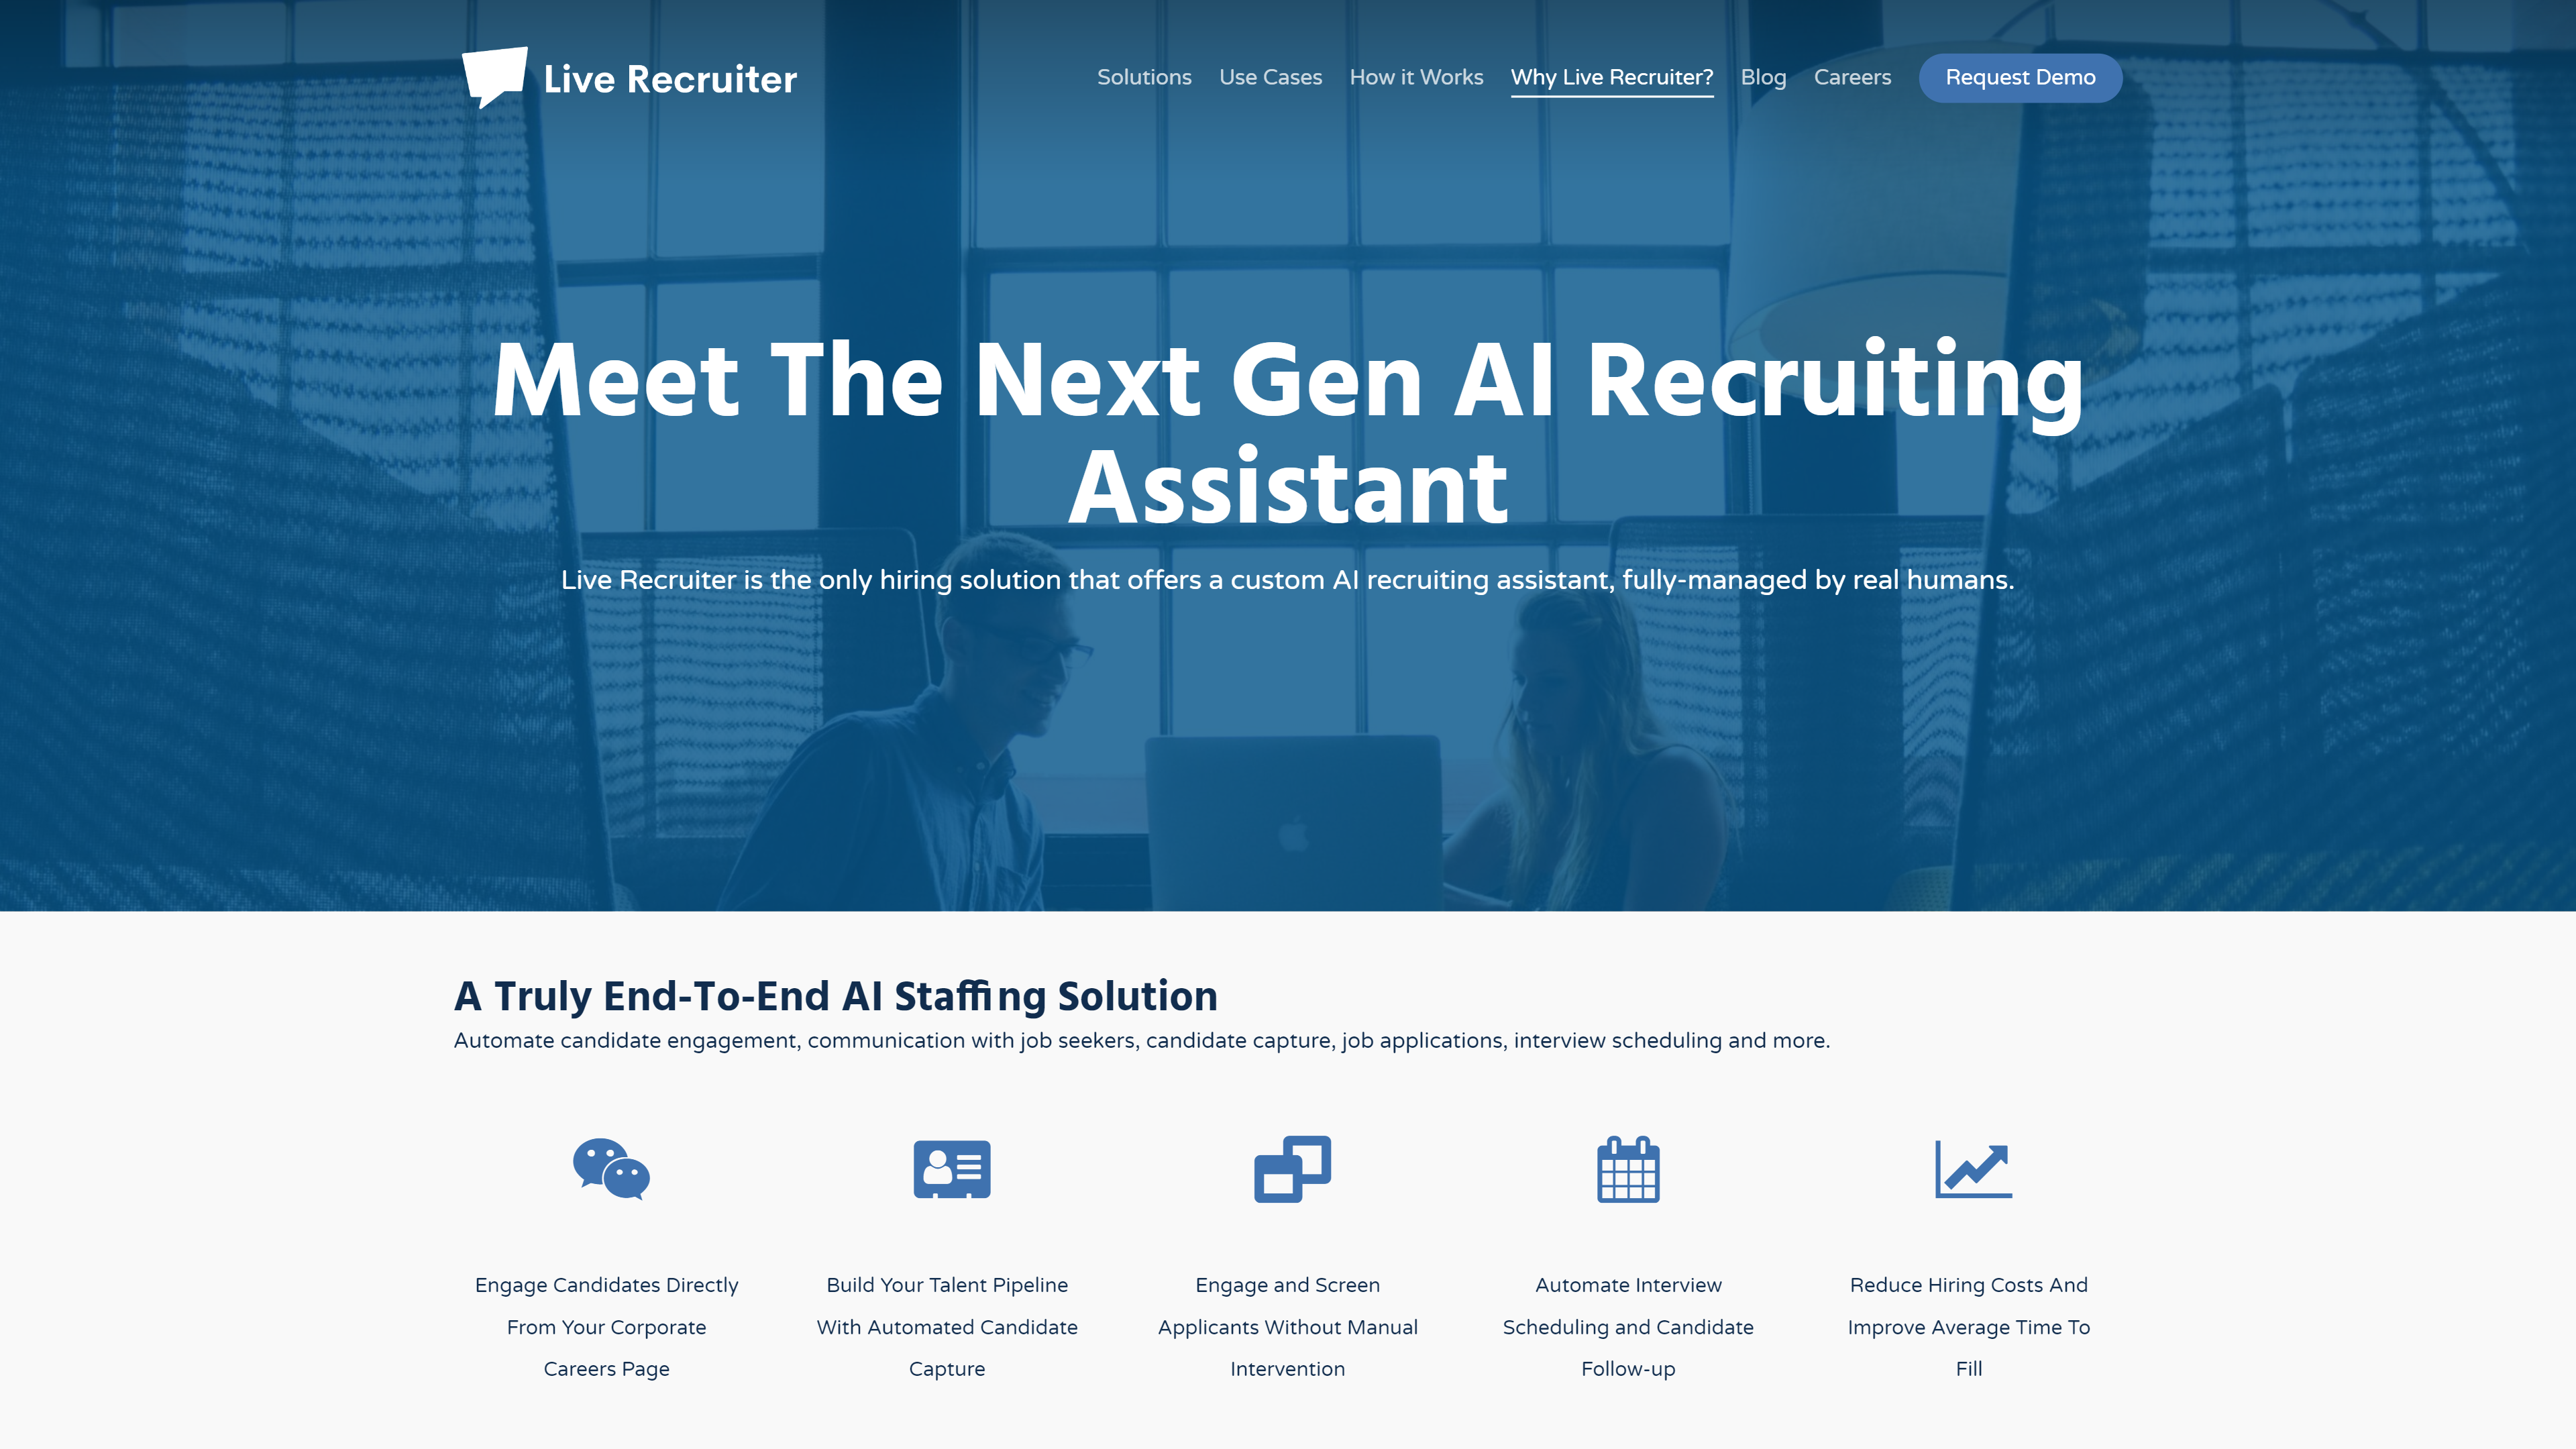 Engage Faster, Hire Smarter with AI